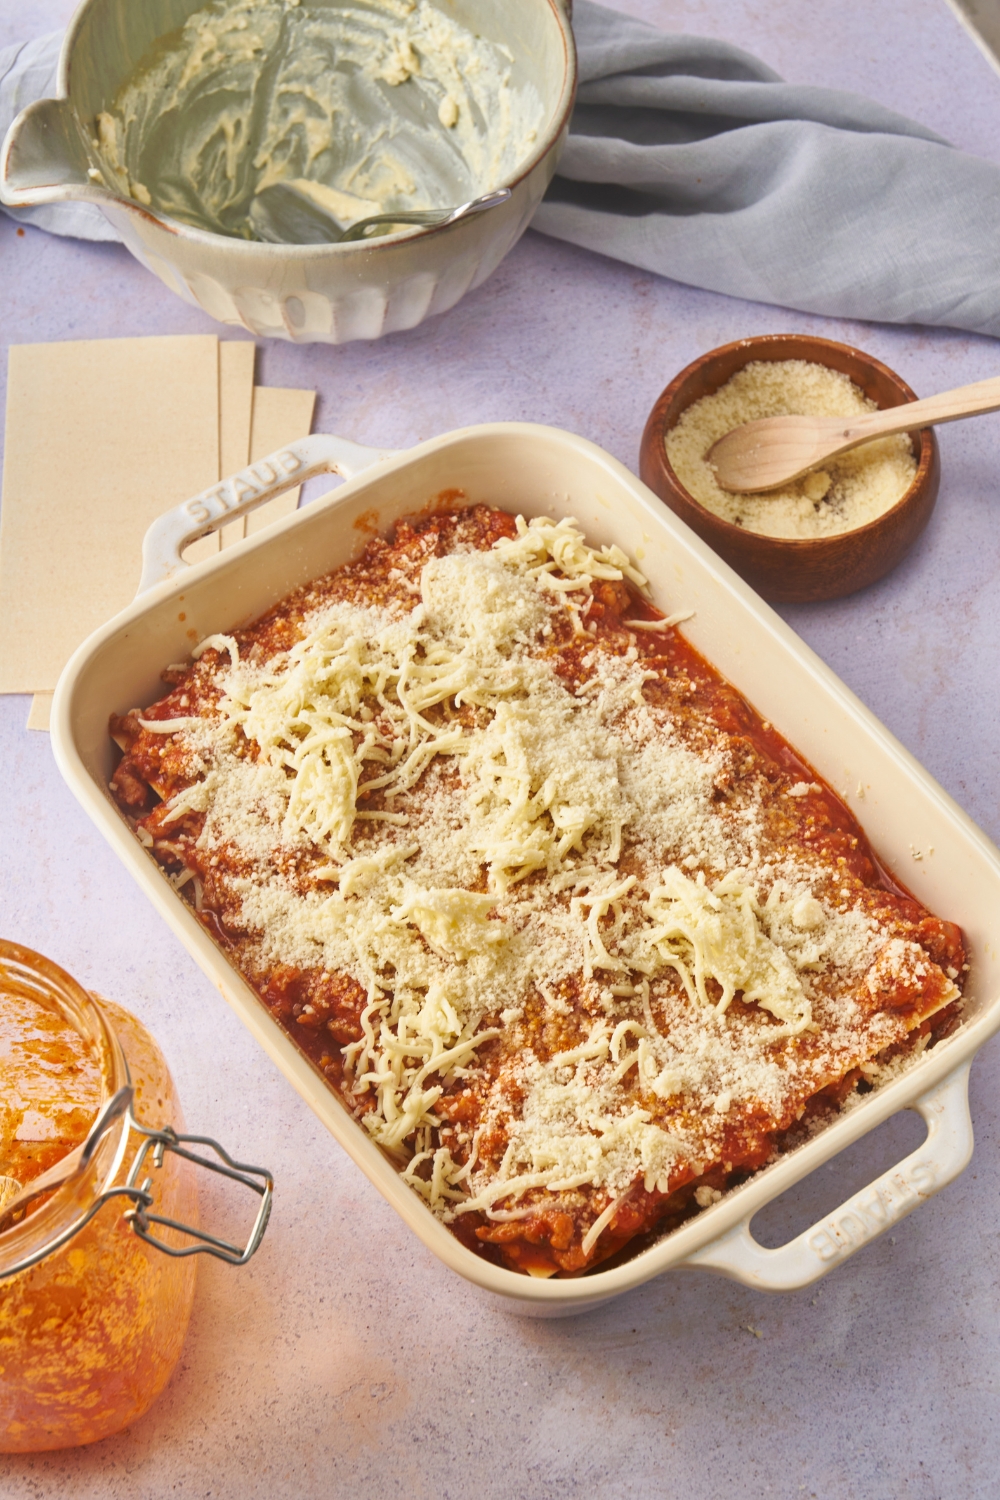 A large white baking dish with an unbaked lasagna covered in shredded cheese on top. Surrounding the lasagna are empty bowls and a bowl of parmesan cheese.